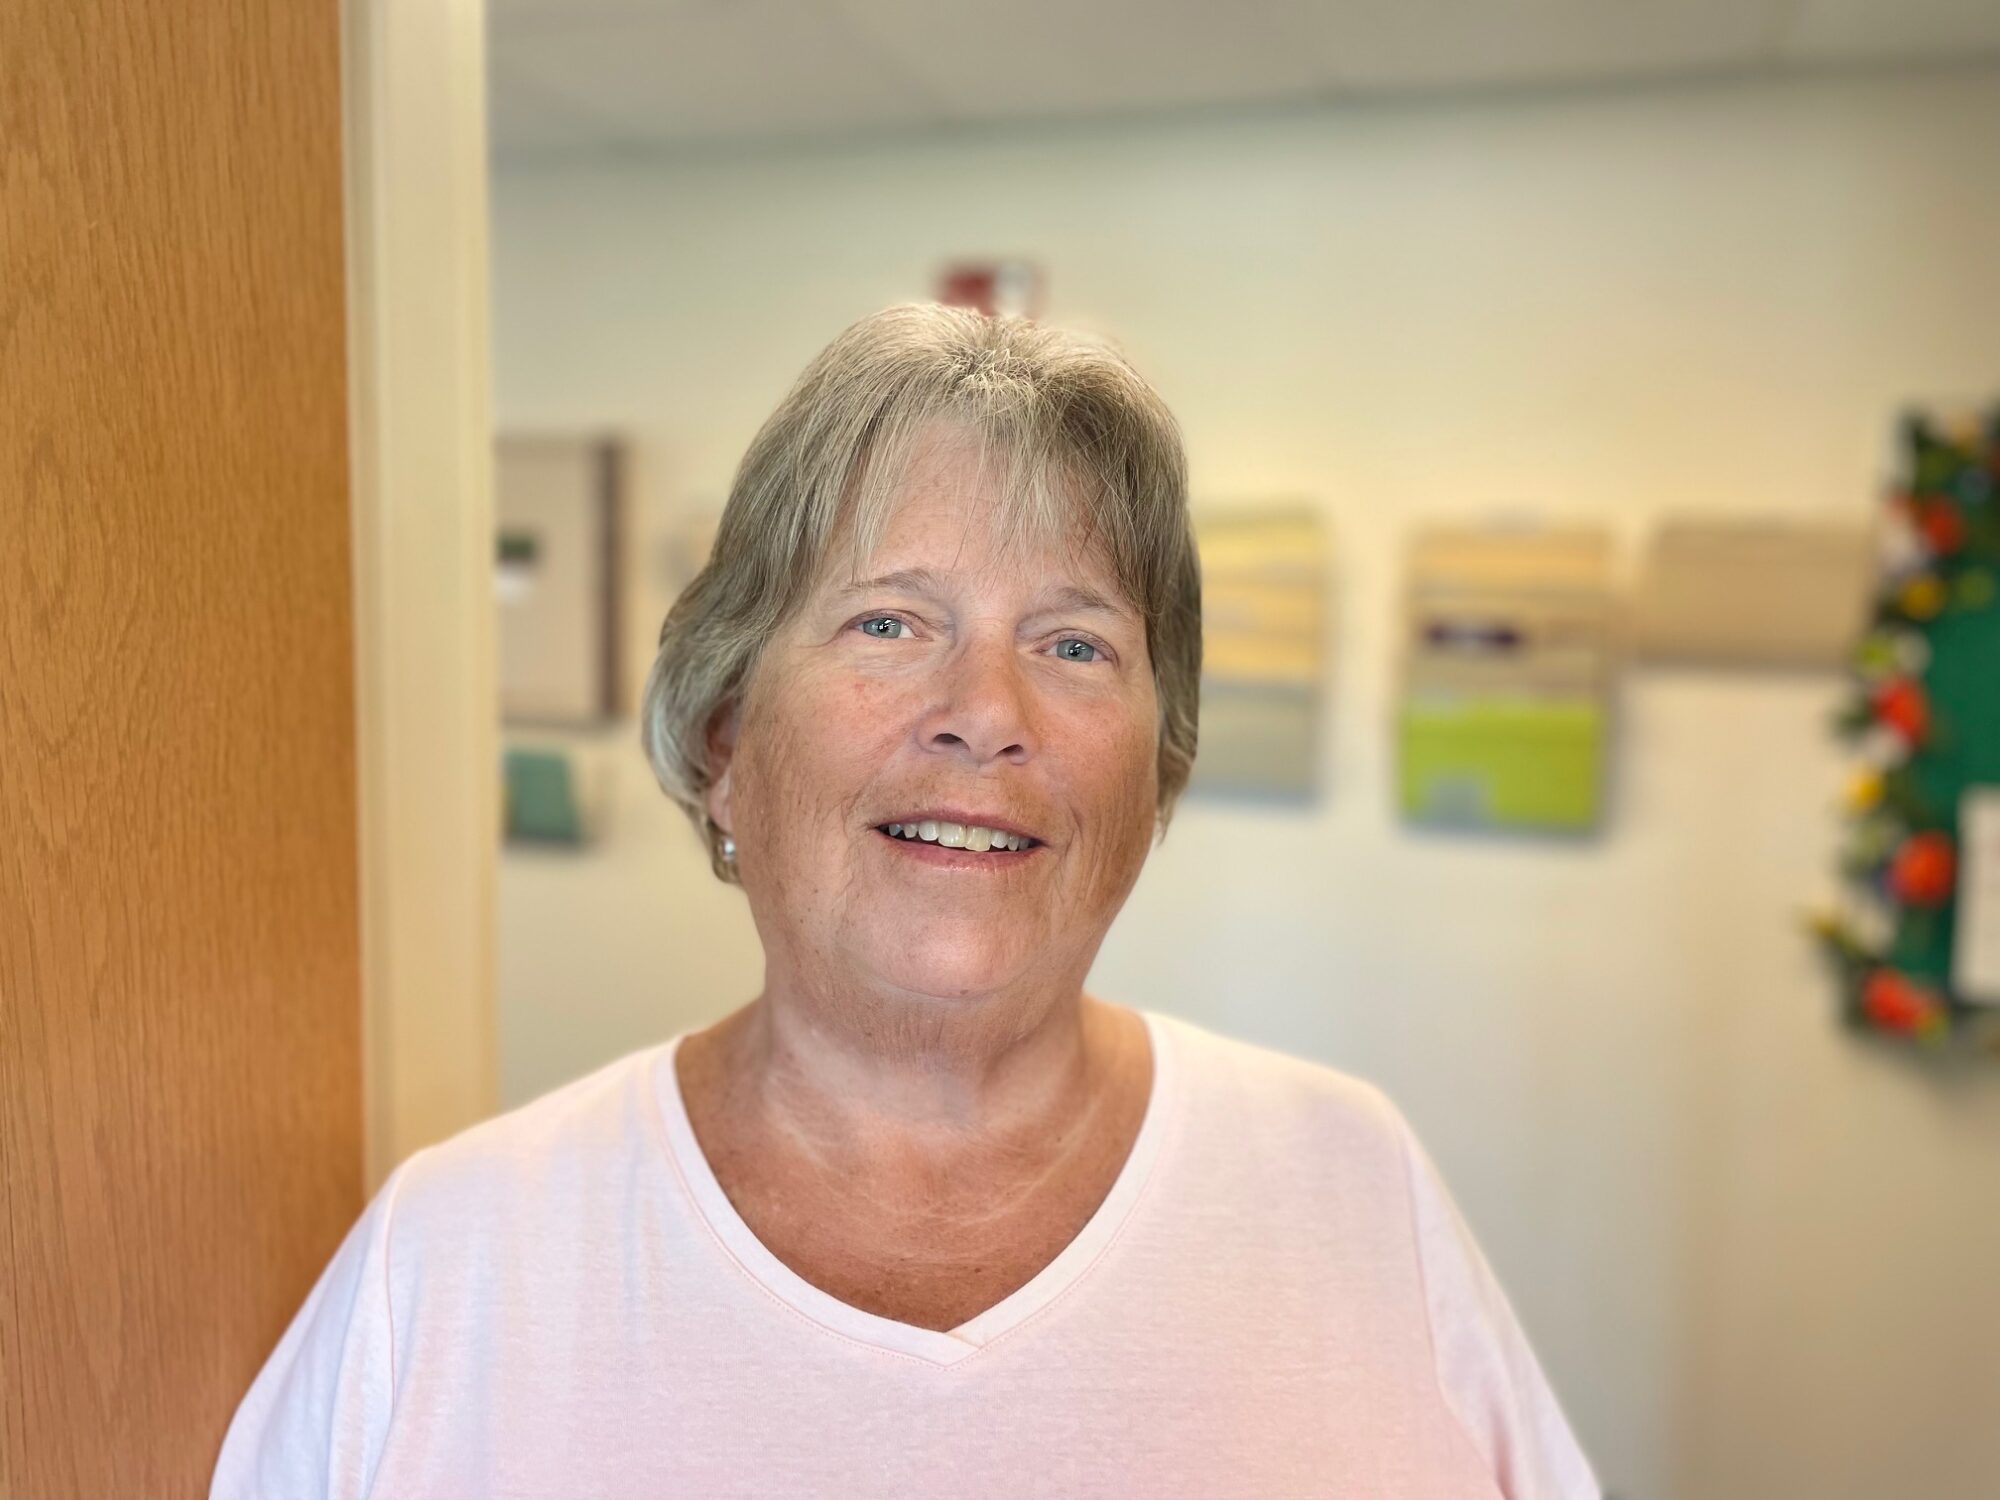 ST. ANDREWS PRESBYTERIAN CHURCH - Deb Rogers, Administrative Assistant